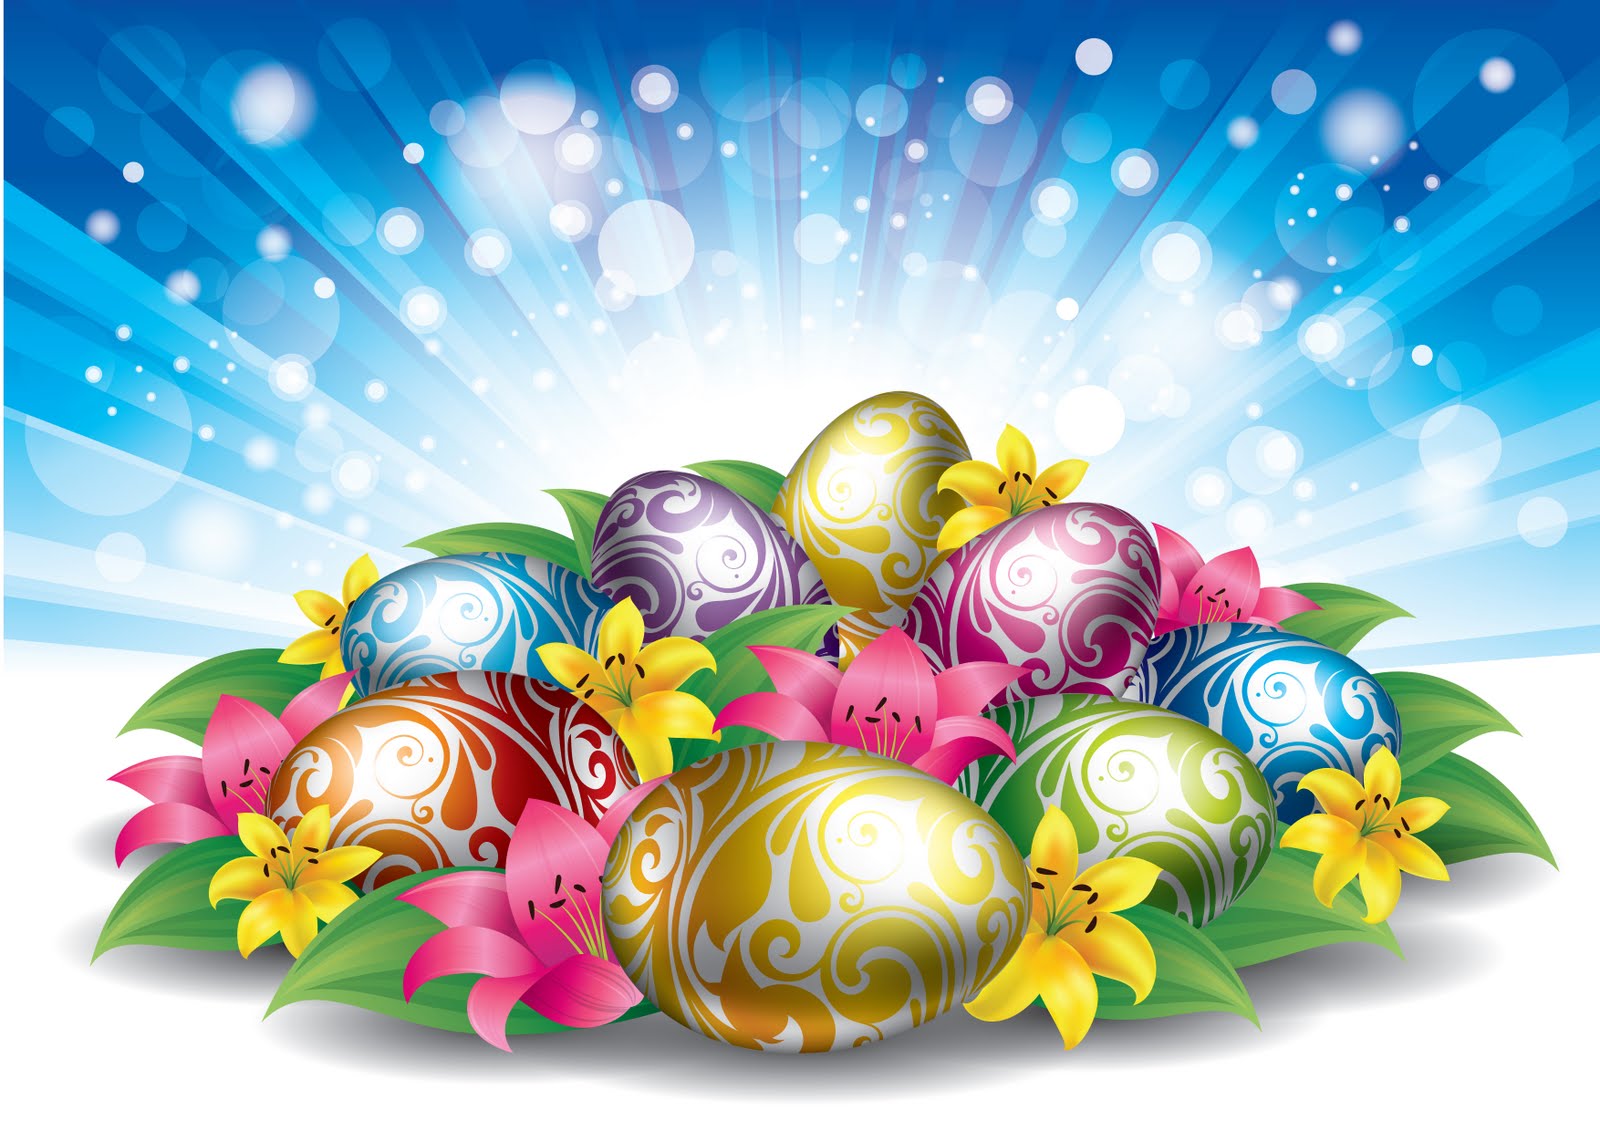 Free Easter Wallpaper For Computer on